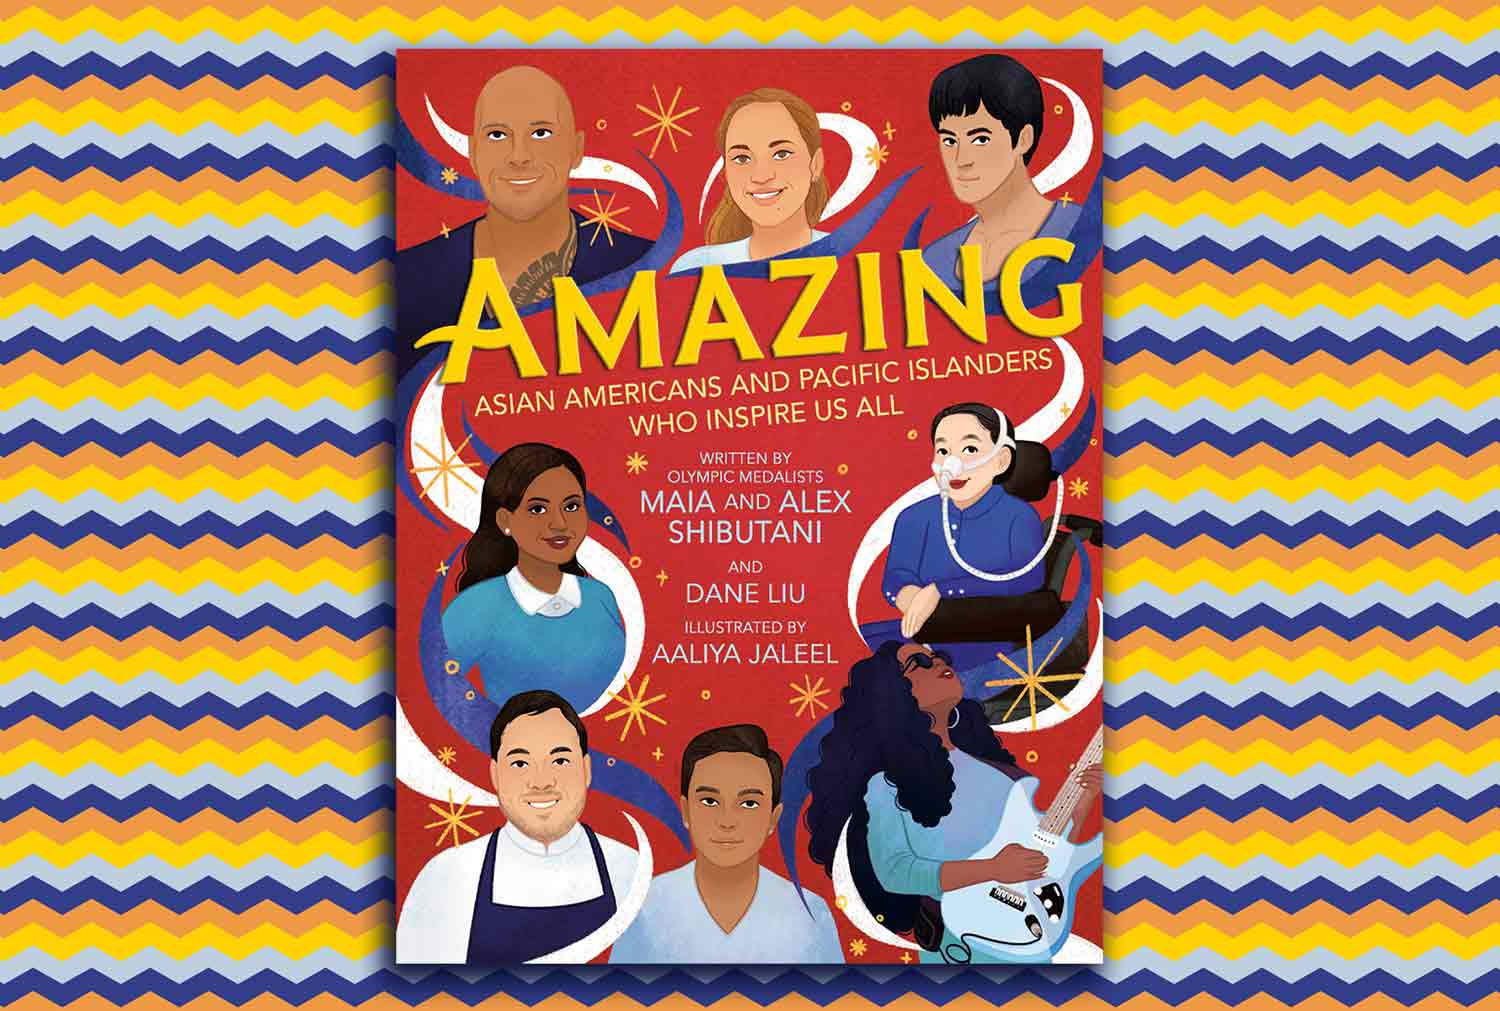 Red book cover with the words Amazing: Asian Americans and Pacific Islanders Who Inspire Us All and illustrations of seven people.